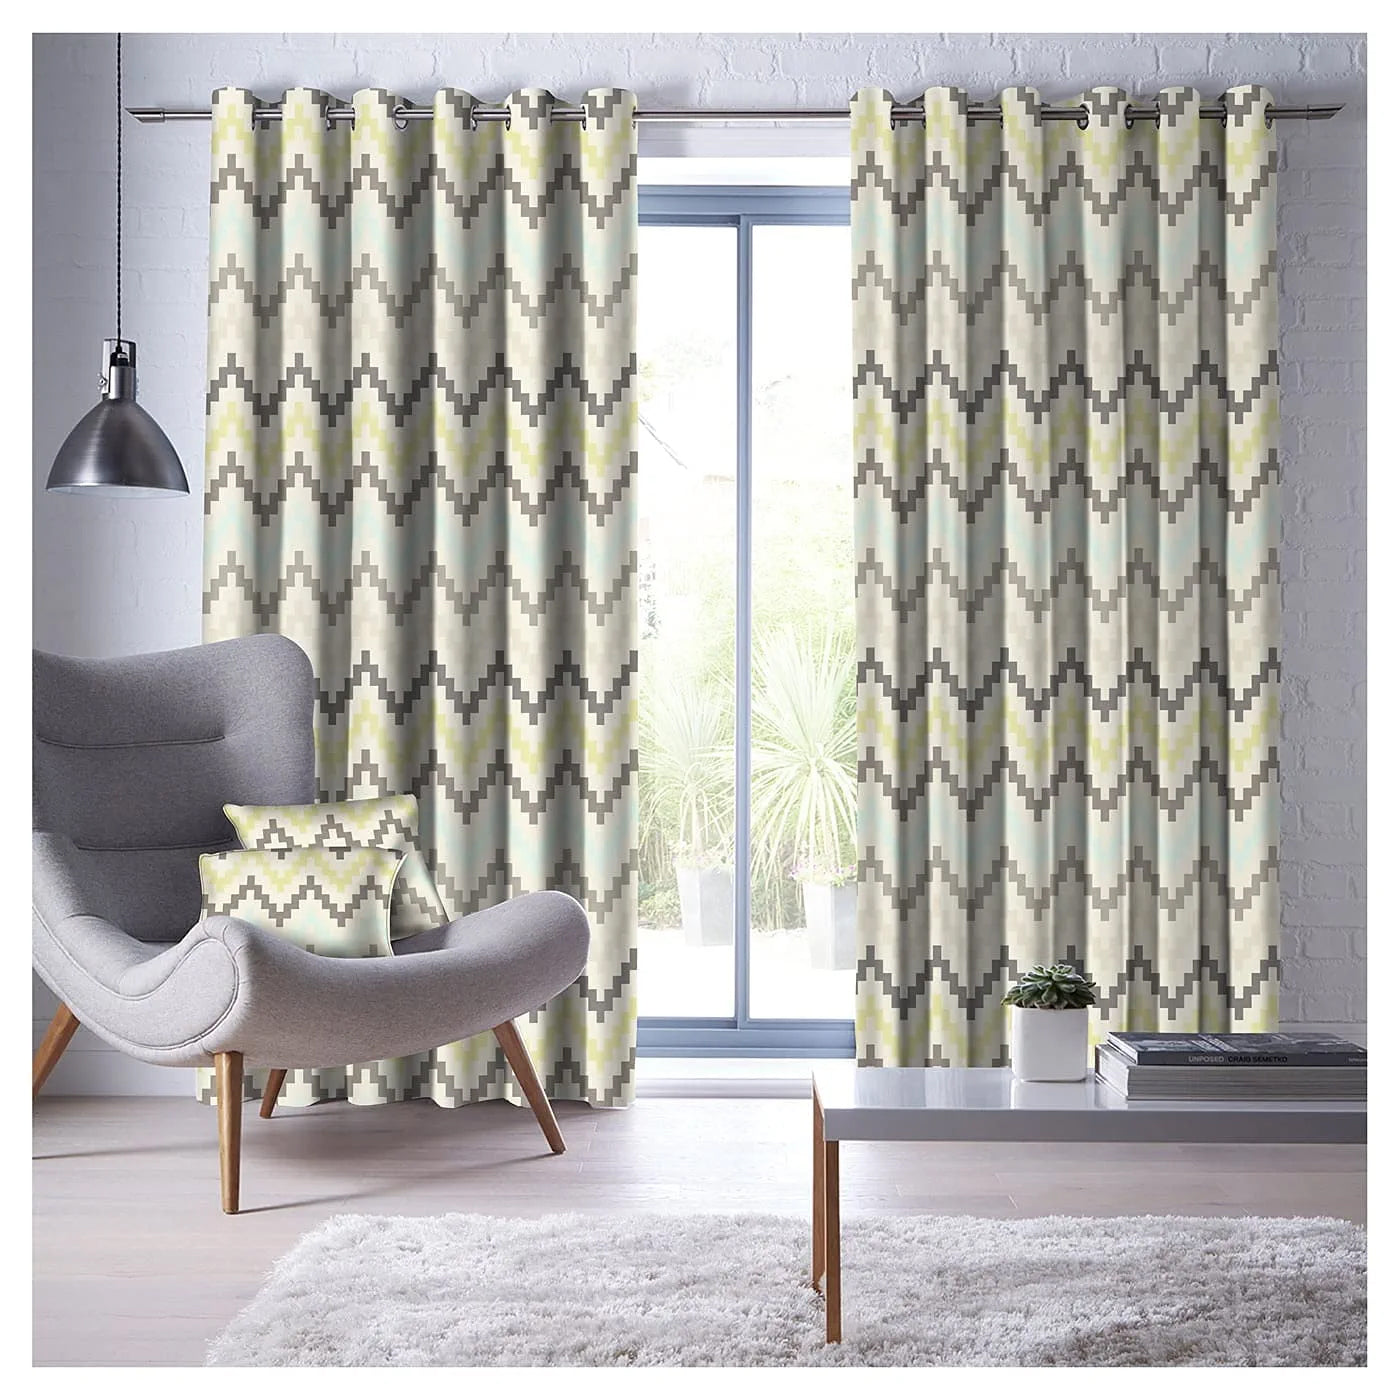 DYKE LIME CURTAIN BLACKOUT PRINTED